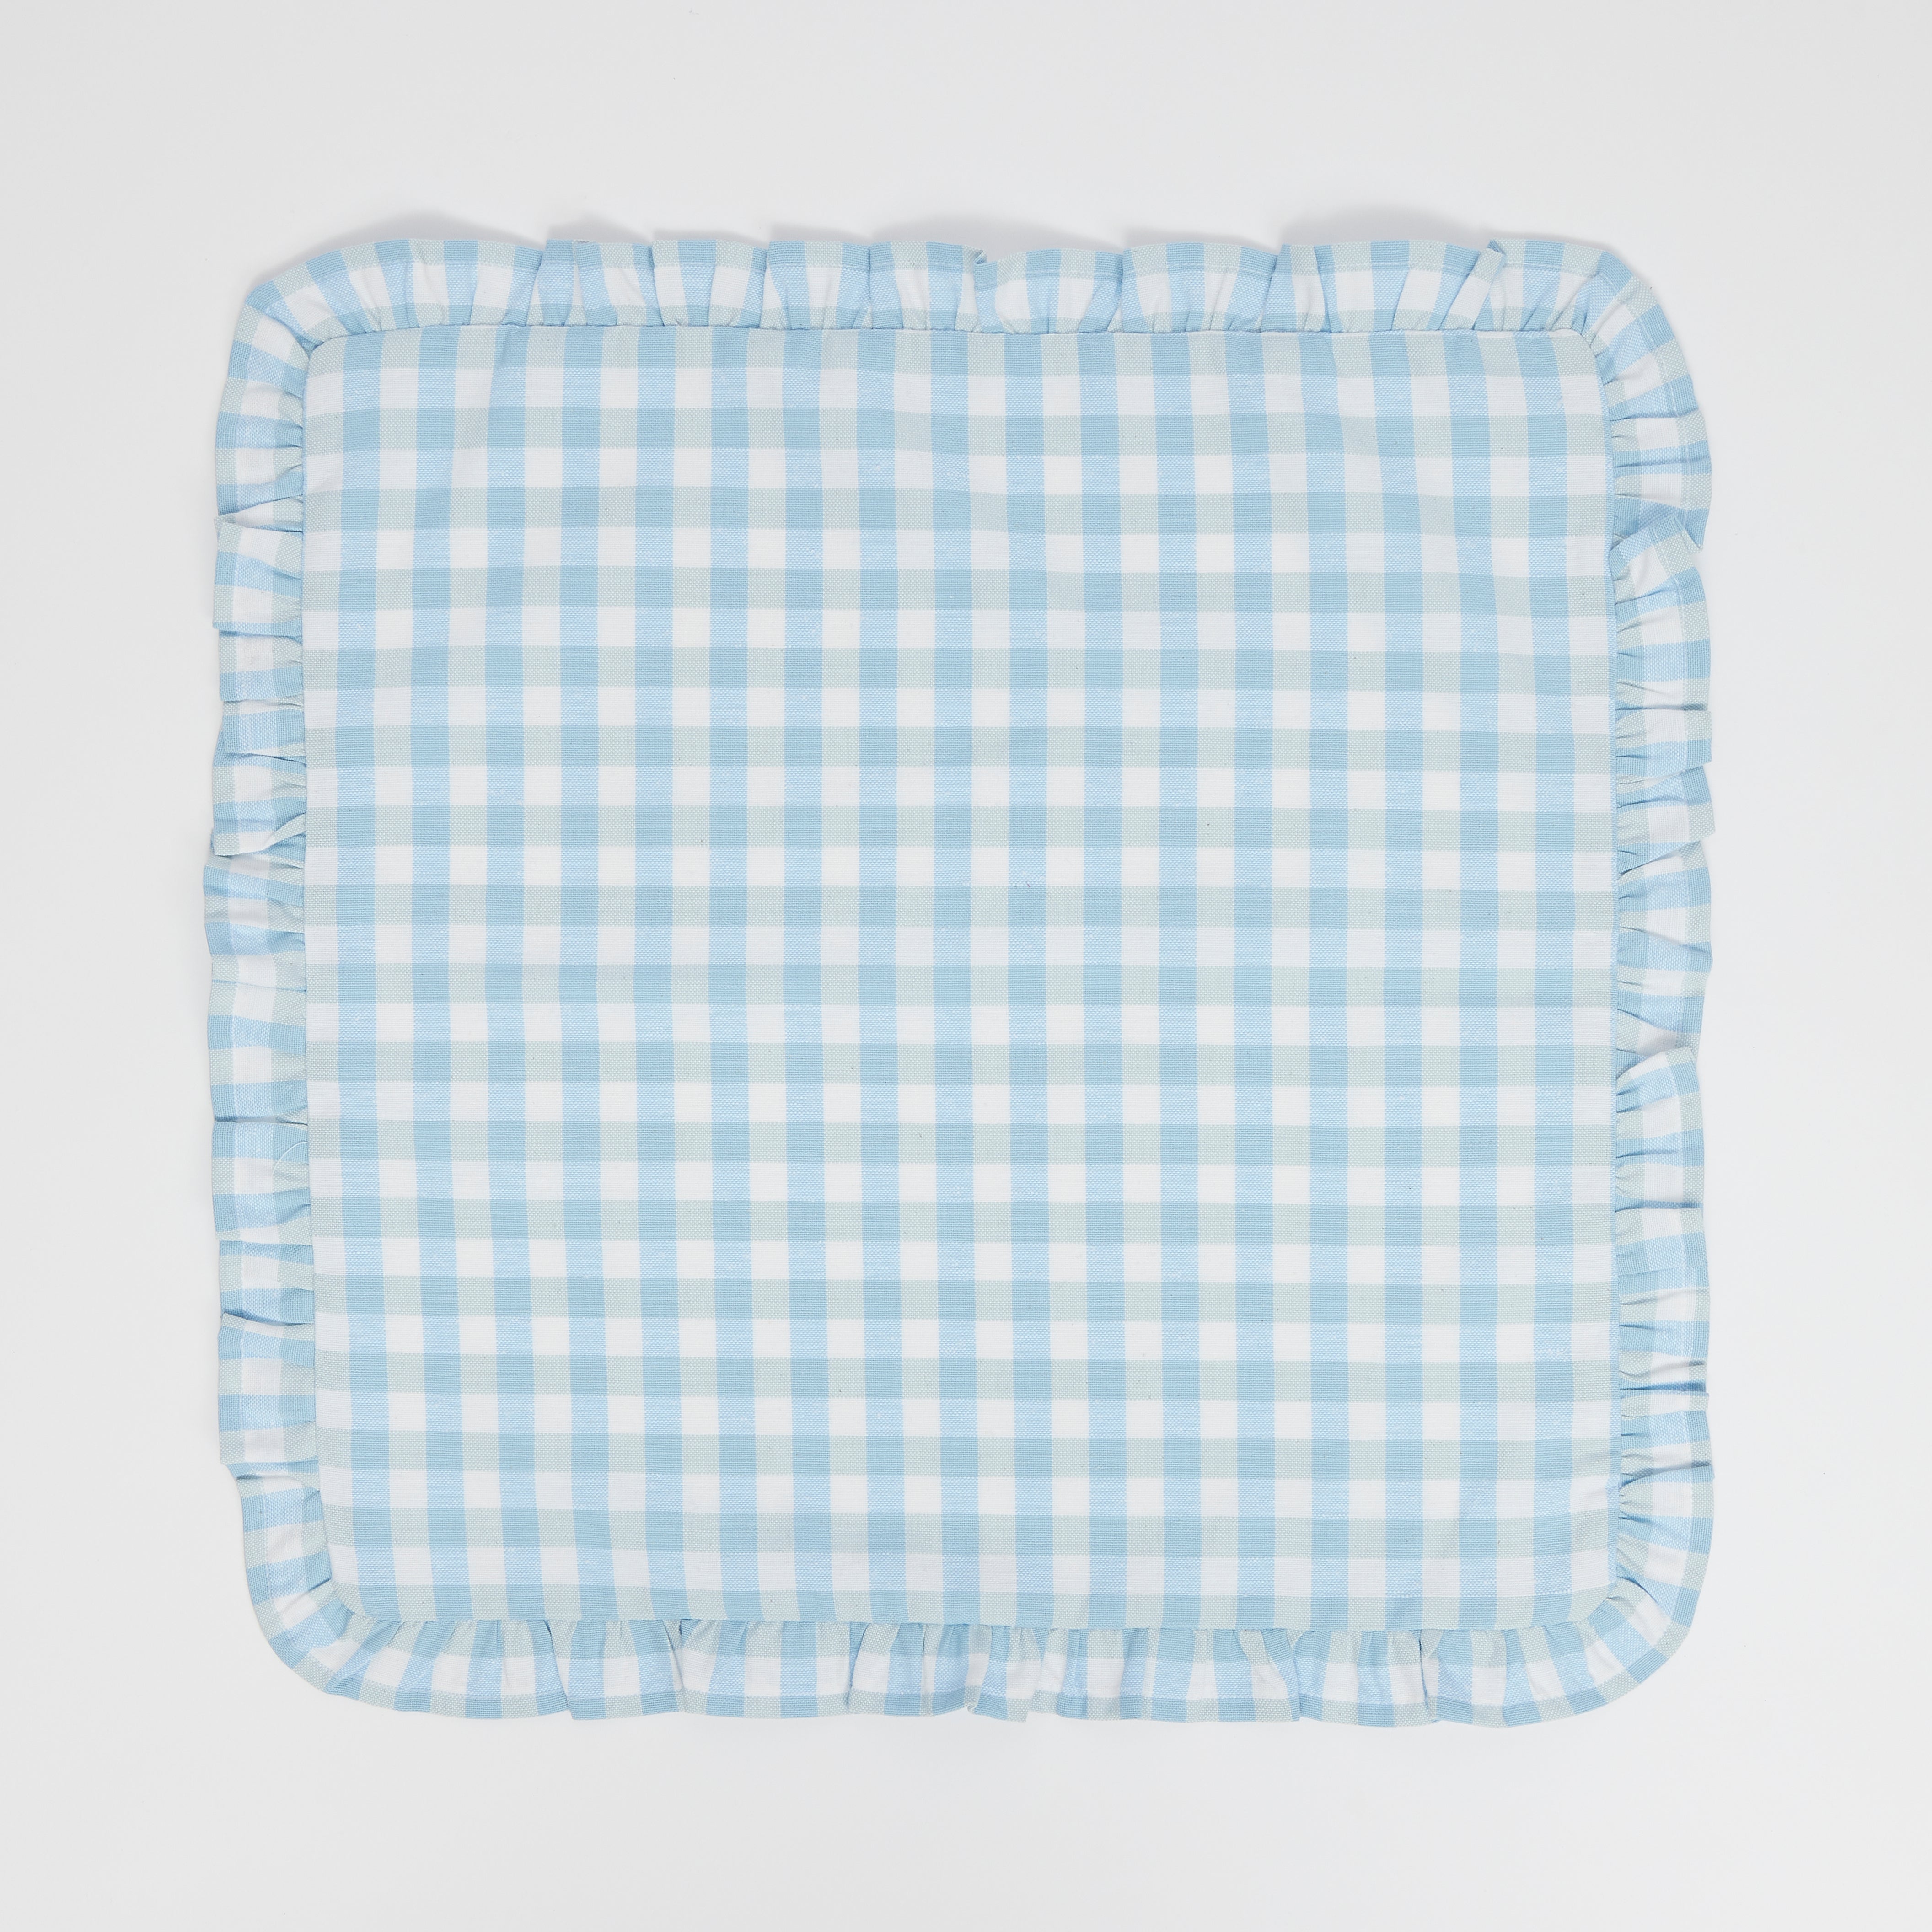 Soft Blue Gingham Placemats (set of 4)